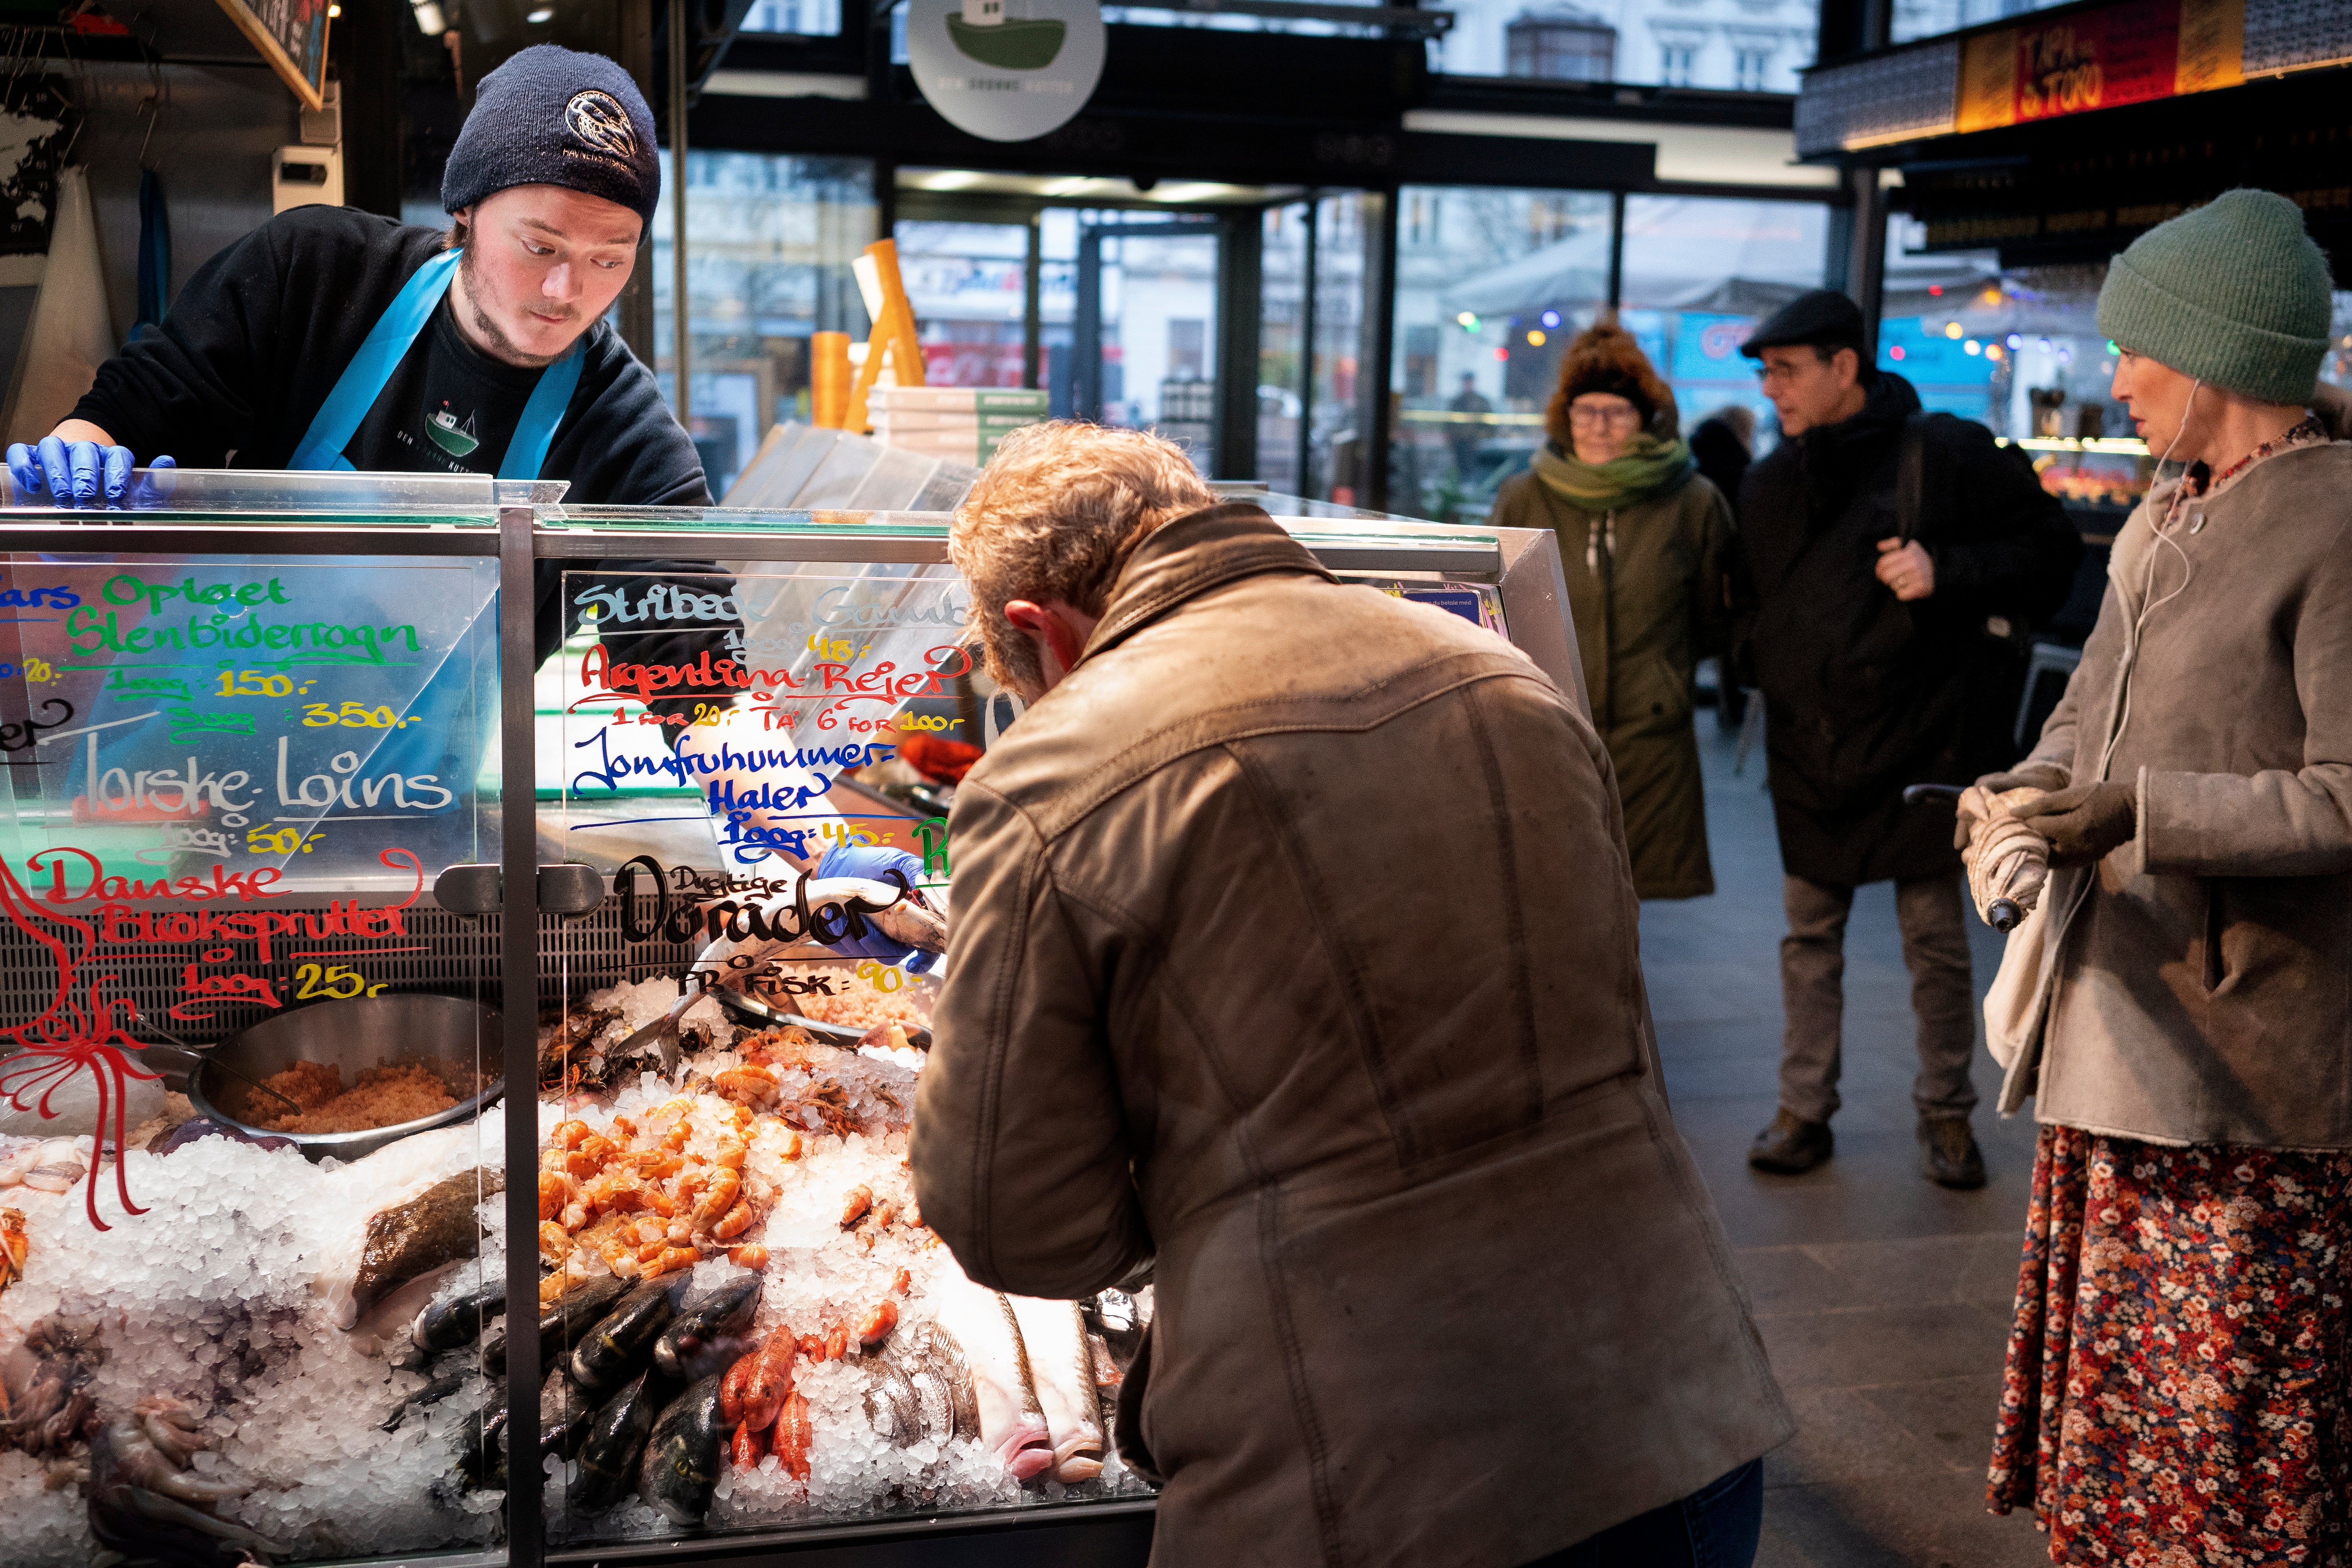 Customers at the fishmarket in Torvehallerne in Copenhagen. As of today it is no longer mandatory to wear protection mask anywhere in public in Denmark